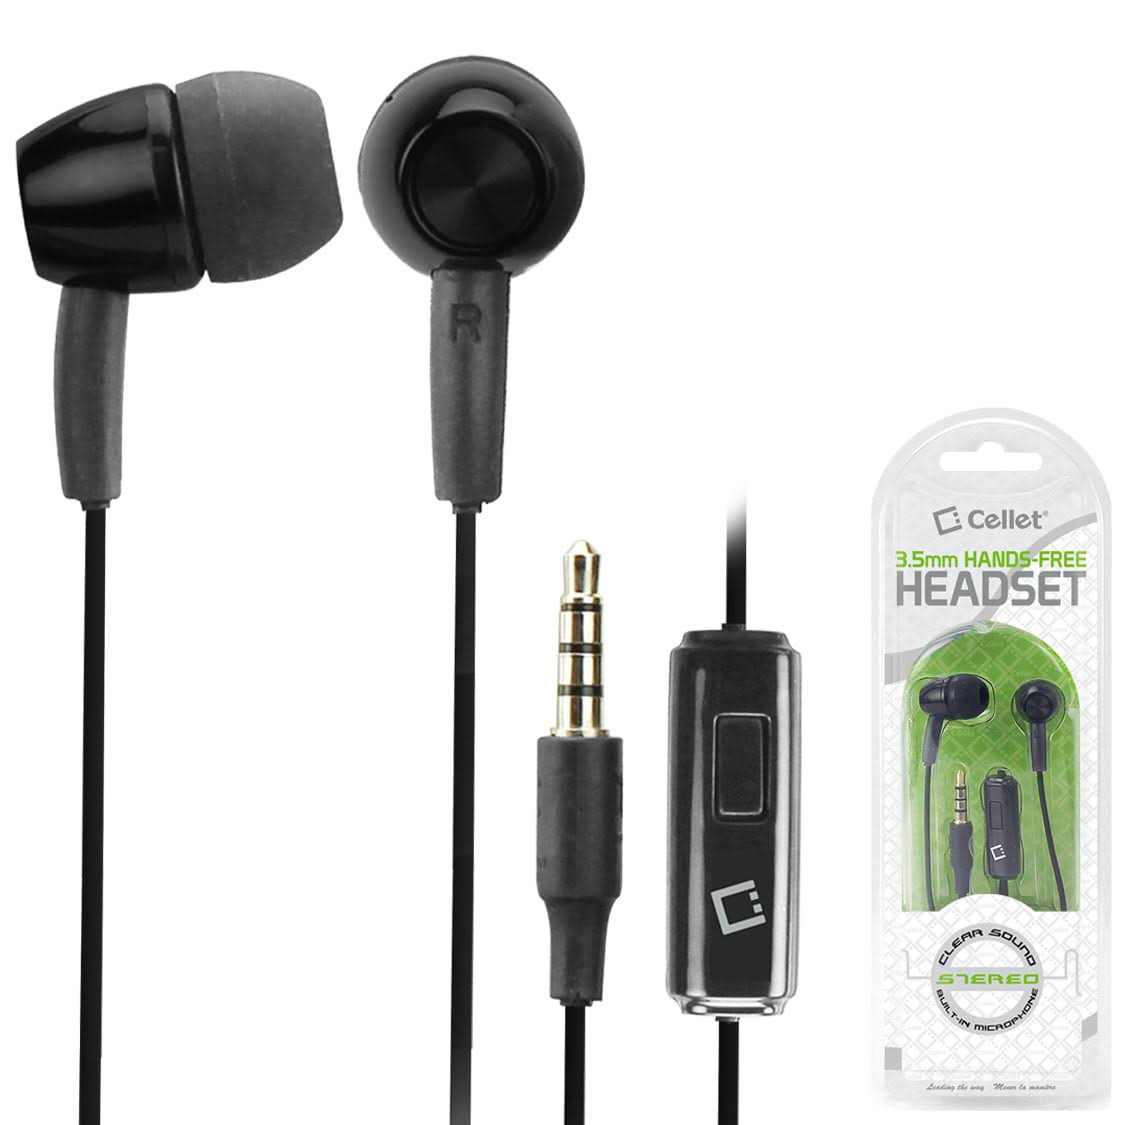 Cellet 3.5mm Hands Free Stereo Earphones with Microphone - Black